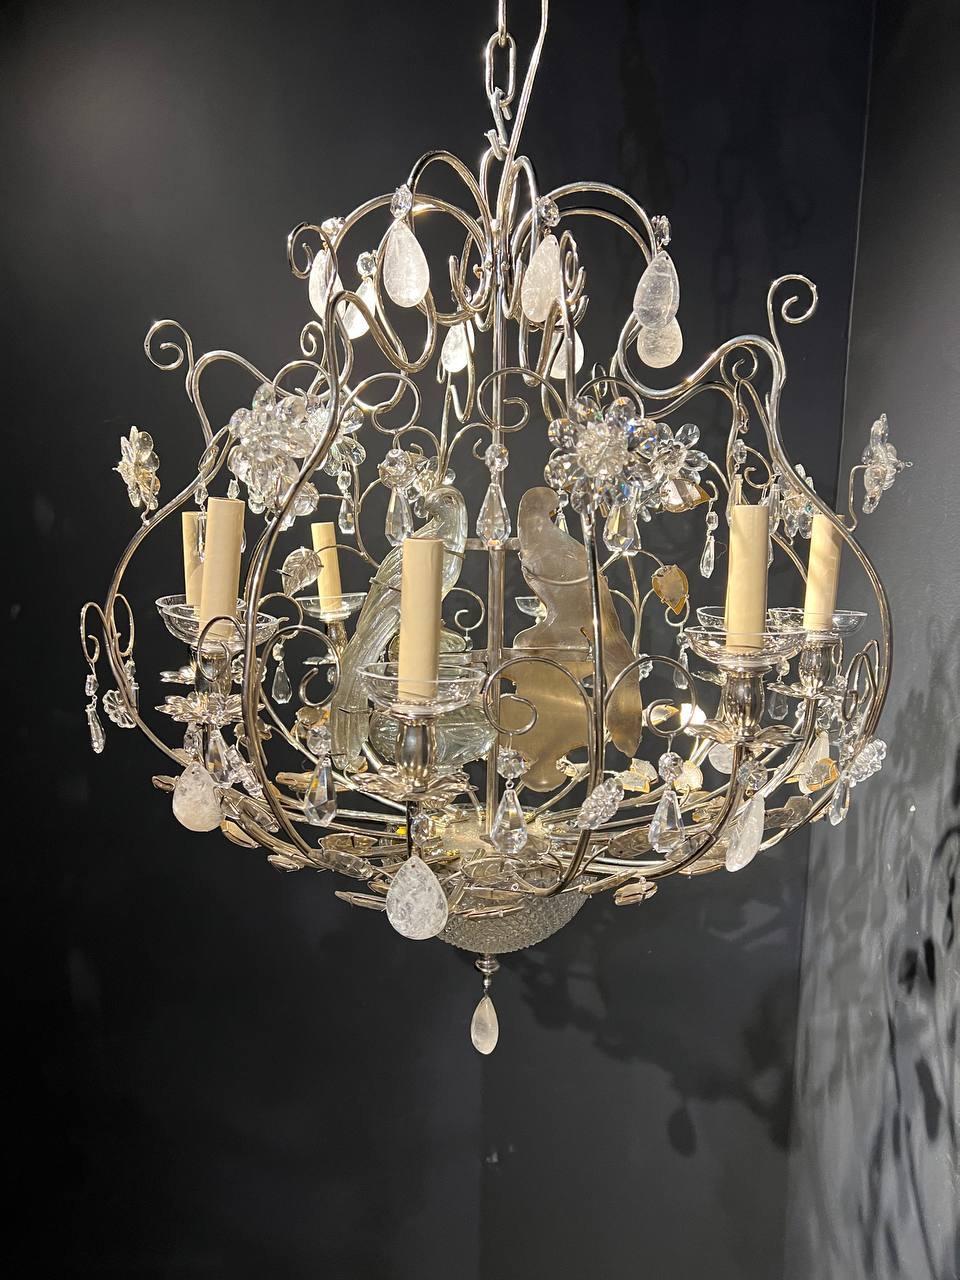 French Provincial 1940’s French Crystal Bird Cage Chandelier For Sale